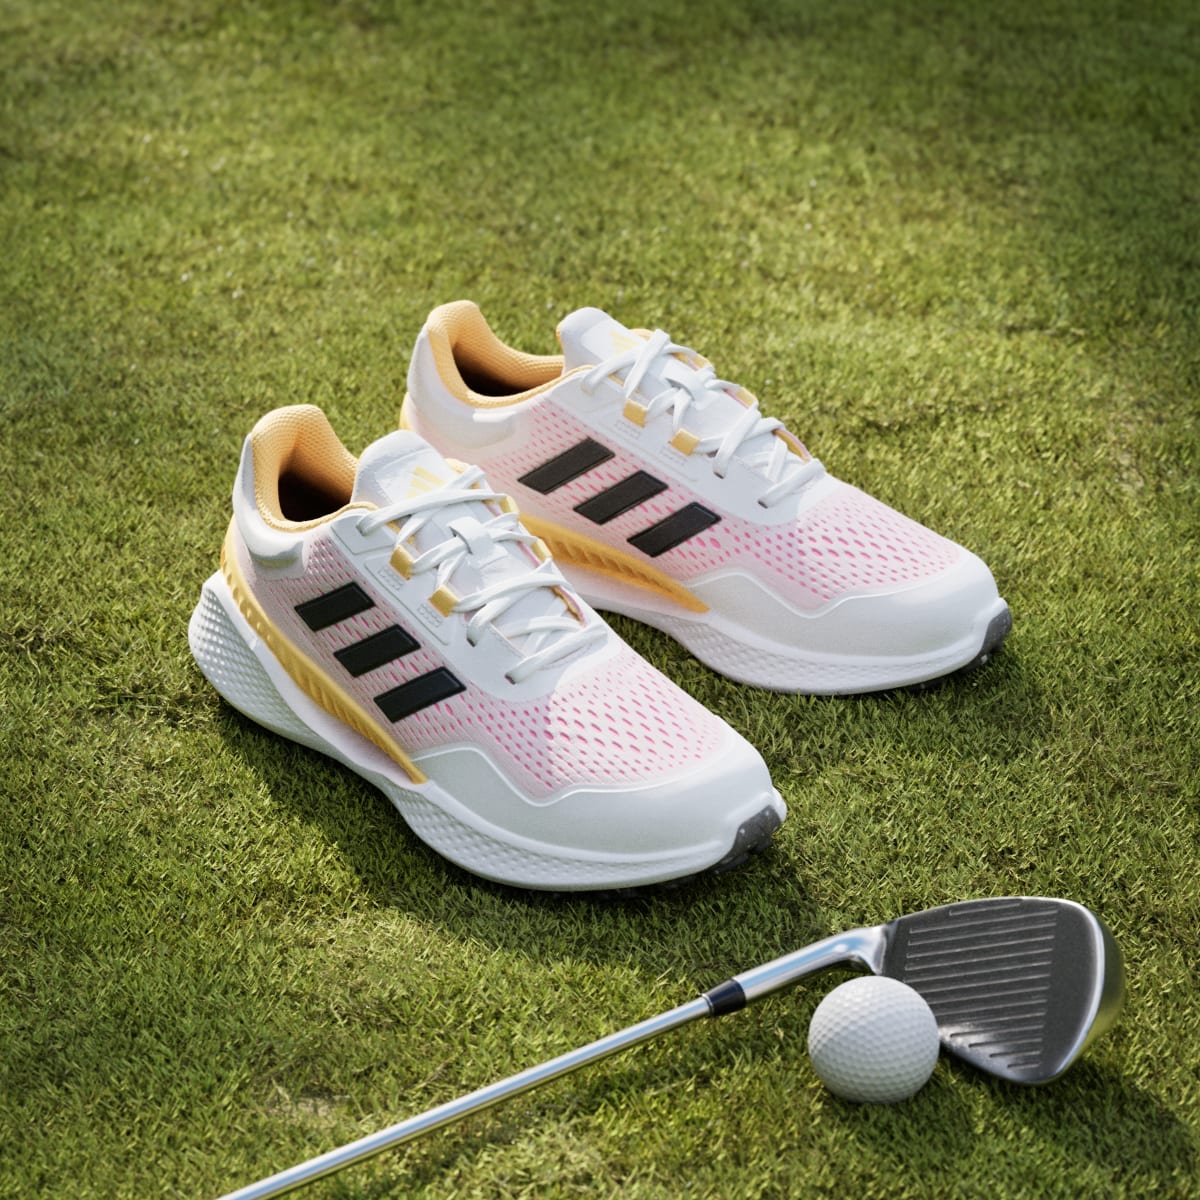 Adidas Summervent 24 Bounce Golf Shoes Low. 4